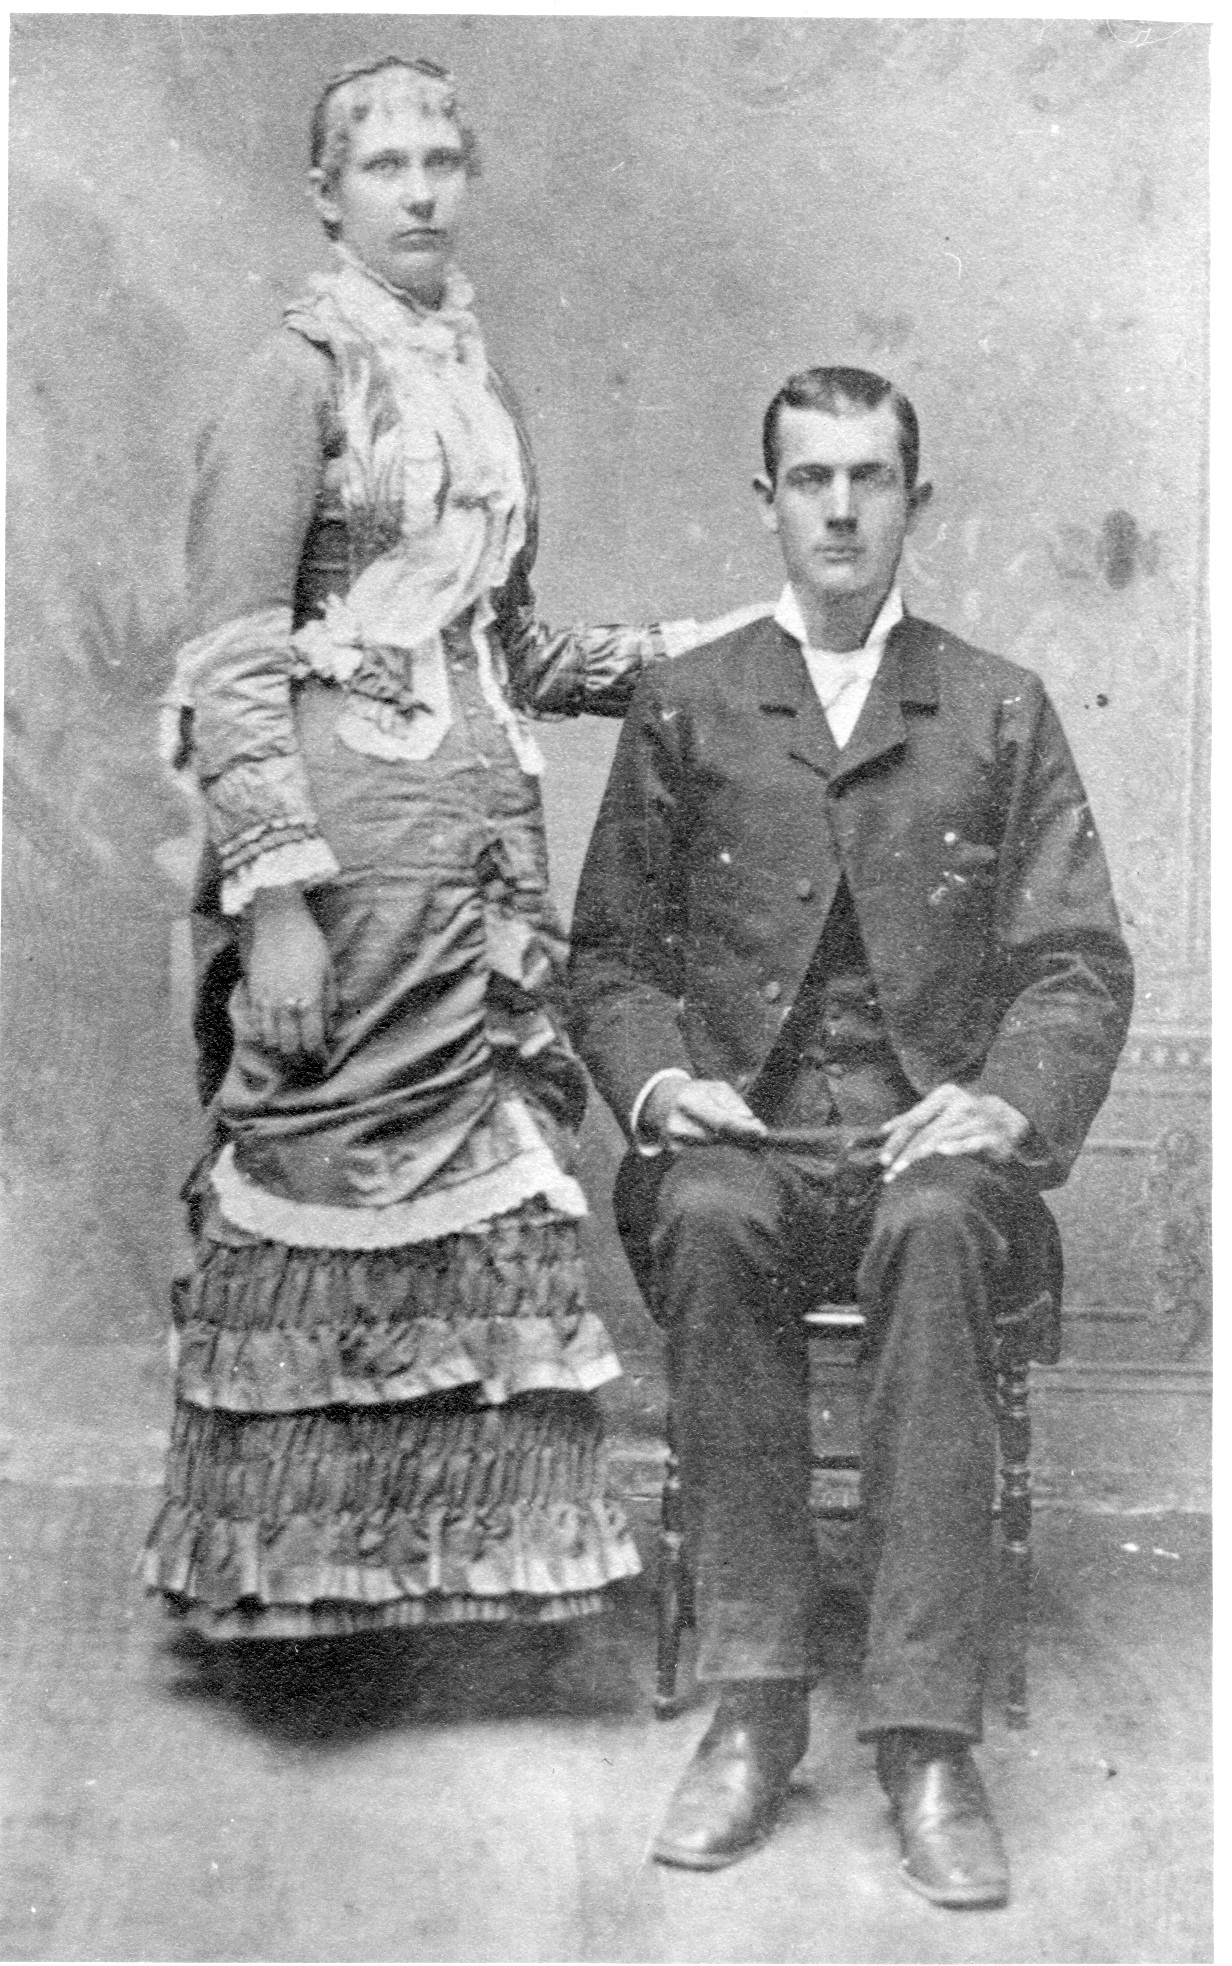 Lucinda Trotter and Charles Bowles